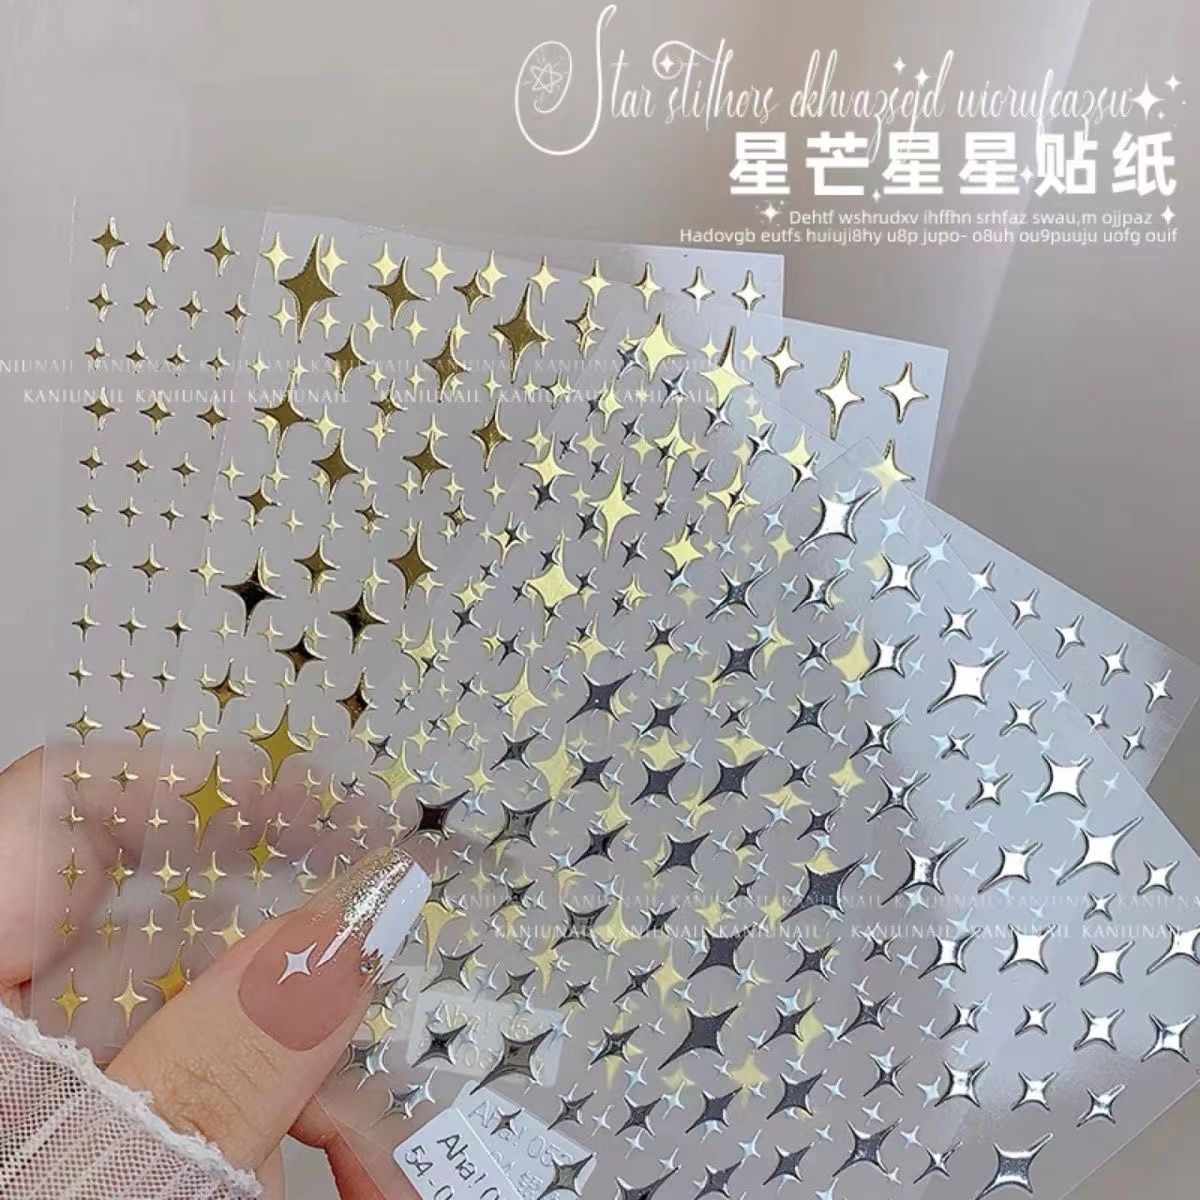 Website Red Star Shing Nail Adhesive Sticker 3D Nail Enhancement Gold and Silver Star Gold and Silver Sticker Decoration Sticker Picture Accessories Flash Diamond